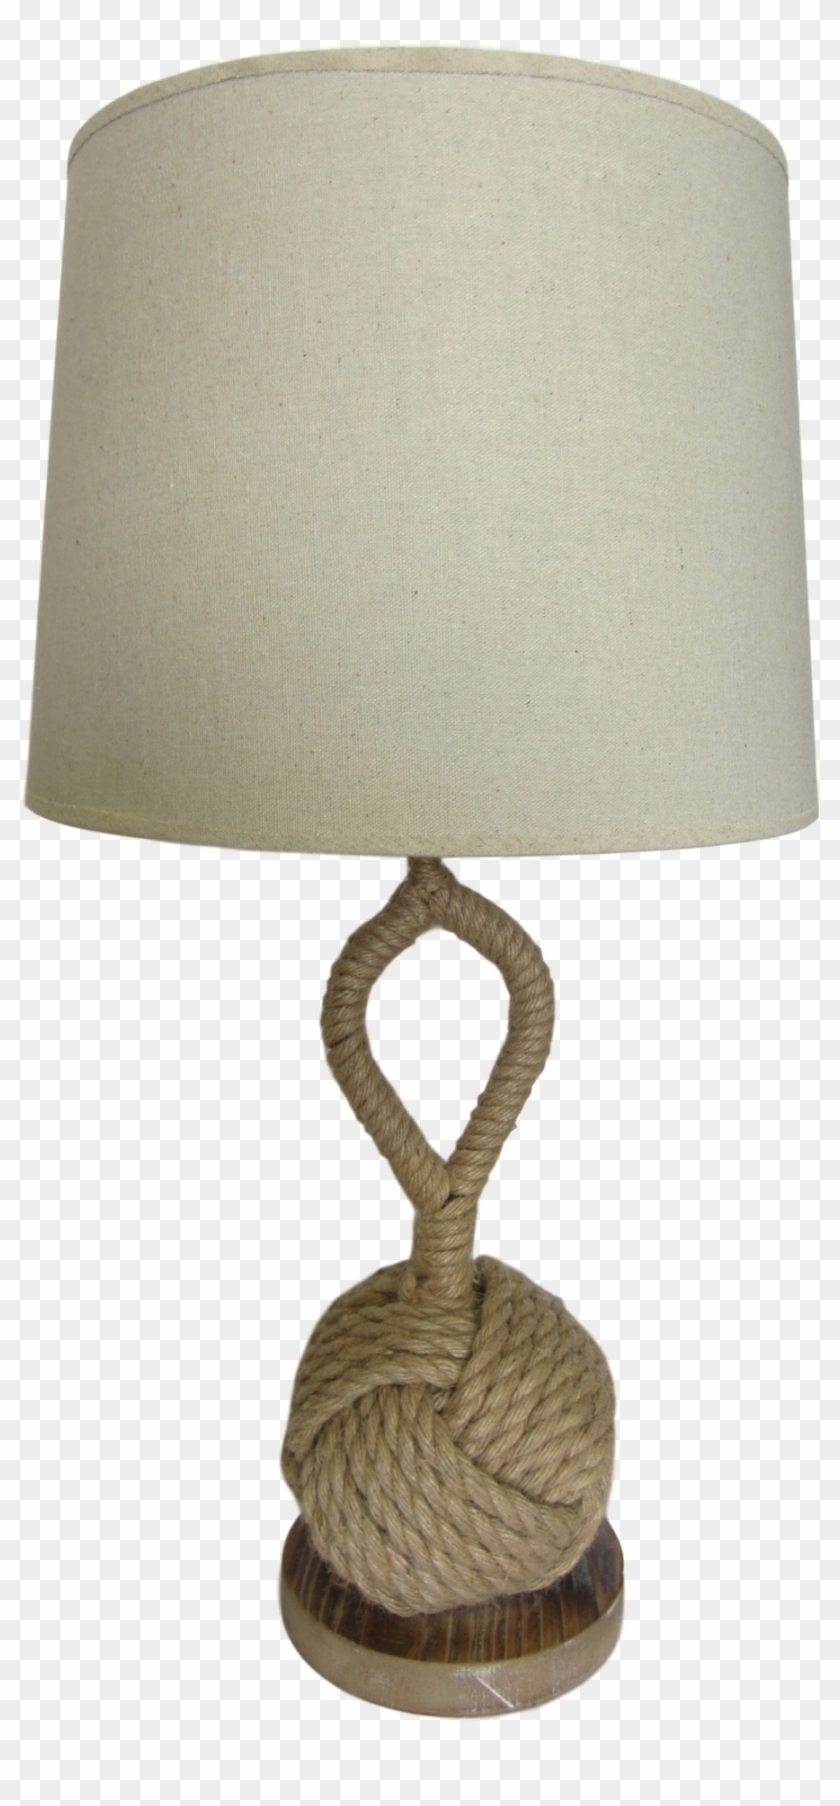 Nautical Rope Knot Table Lamp - Lamp Clipart #3120809